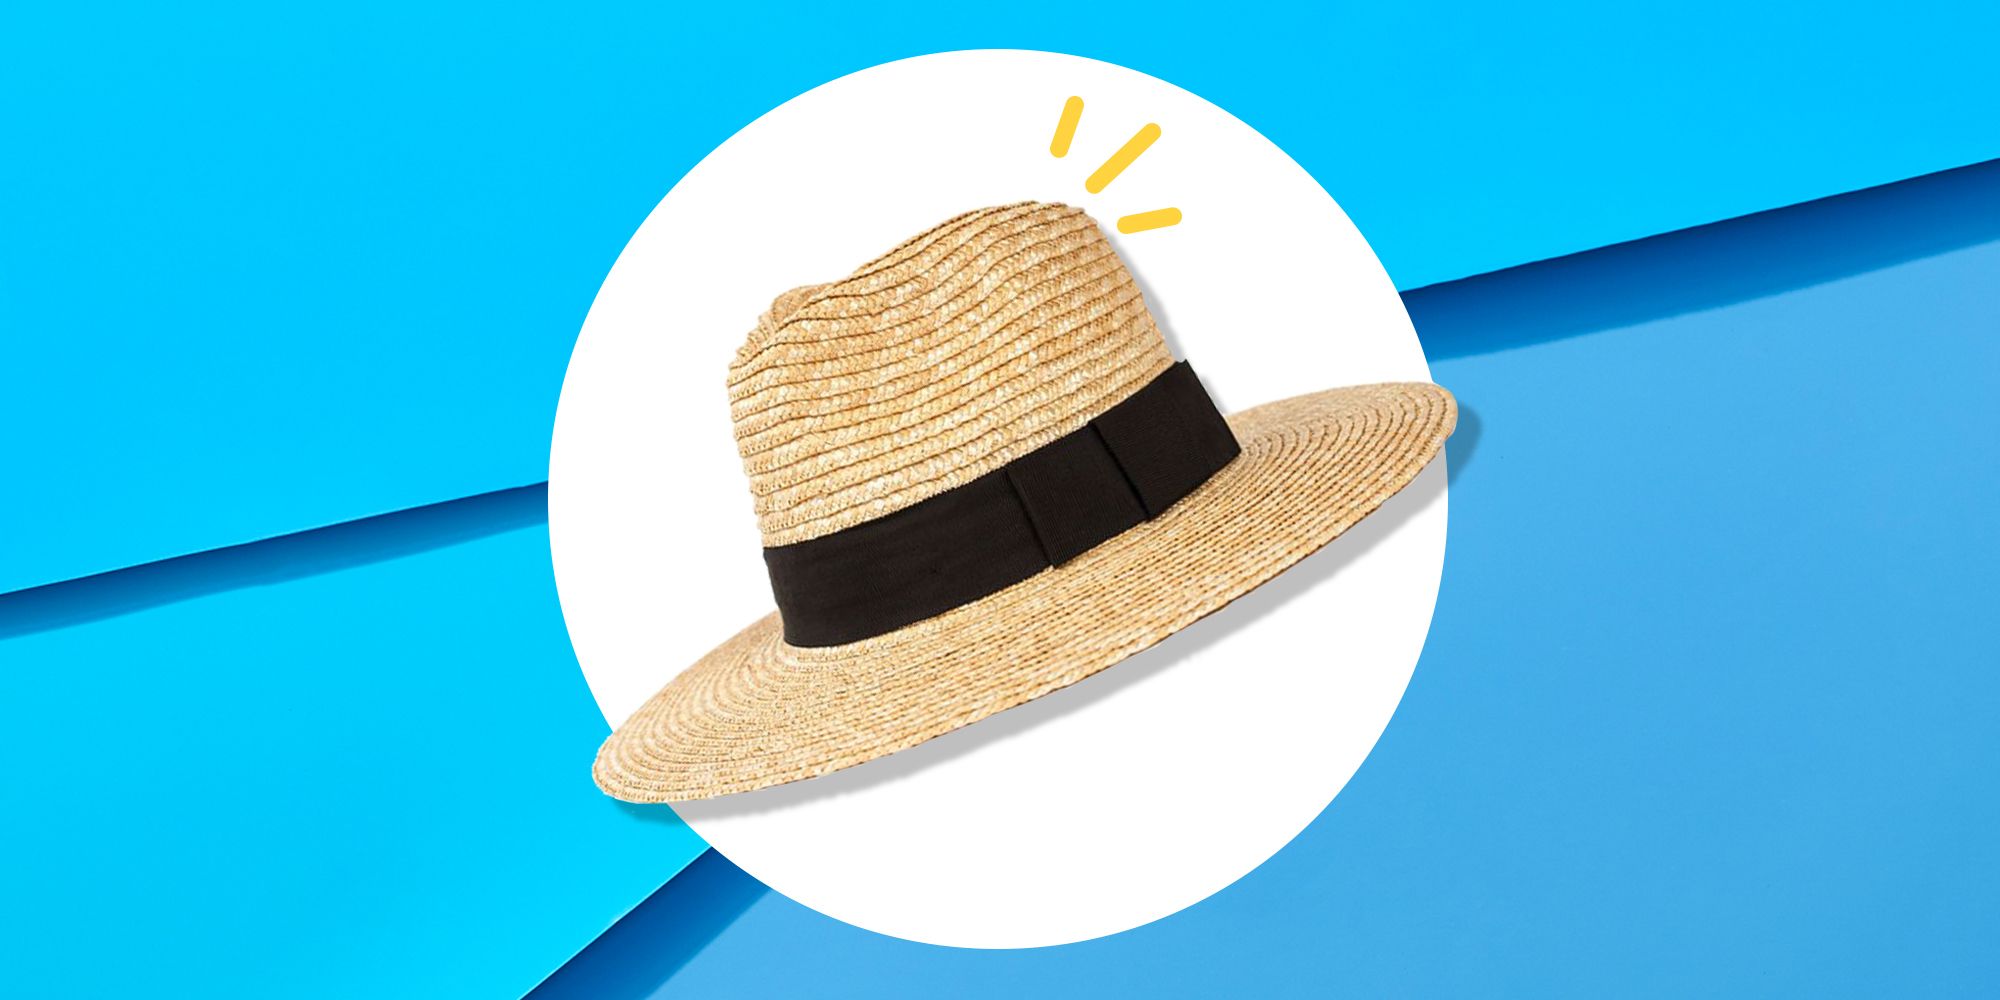 Classic Men's Straw Hat - Stylish And Breathable Summer Straw Hat